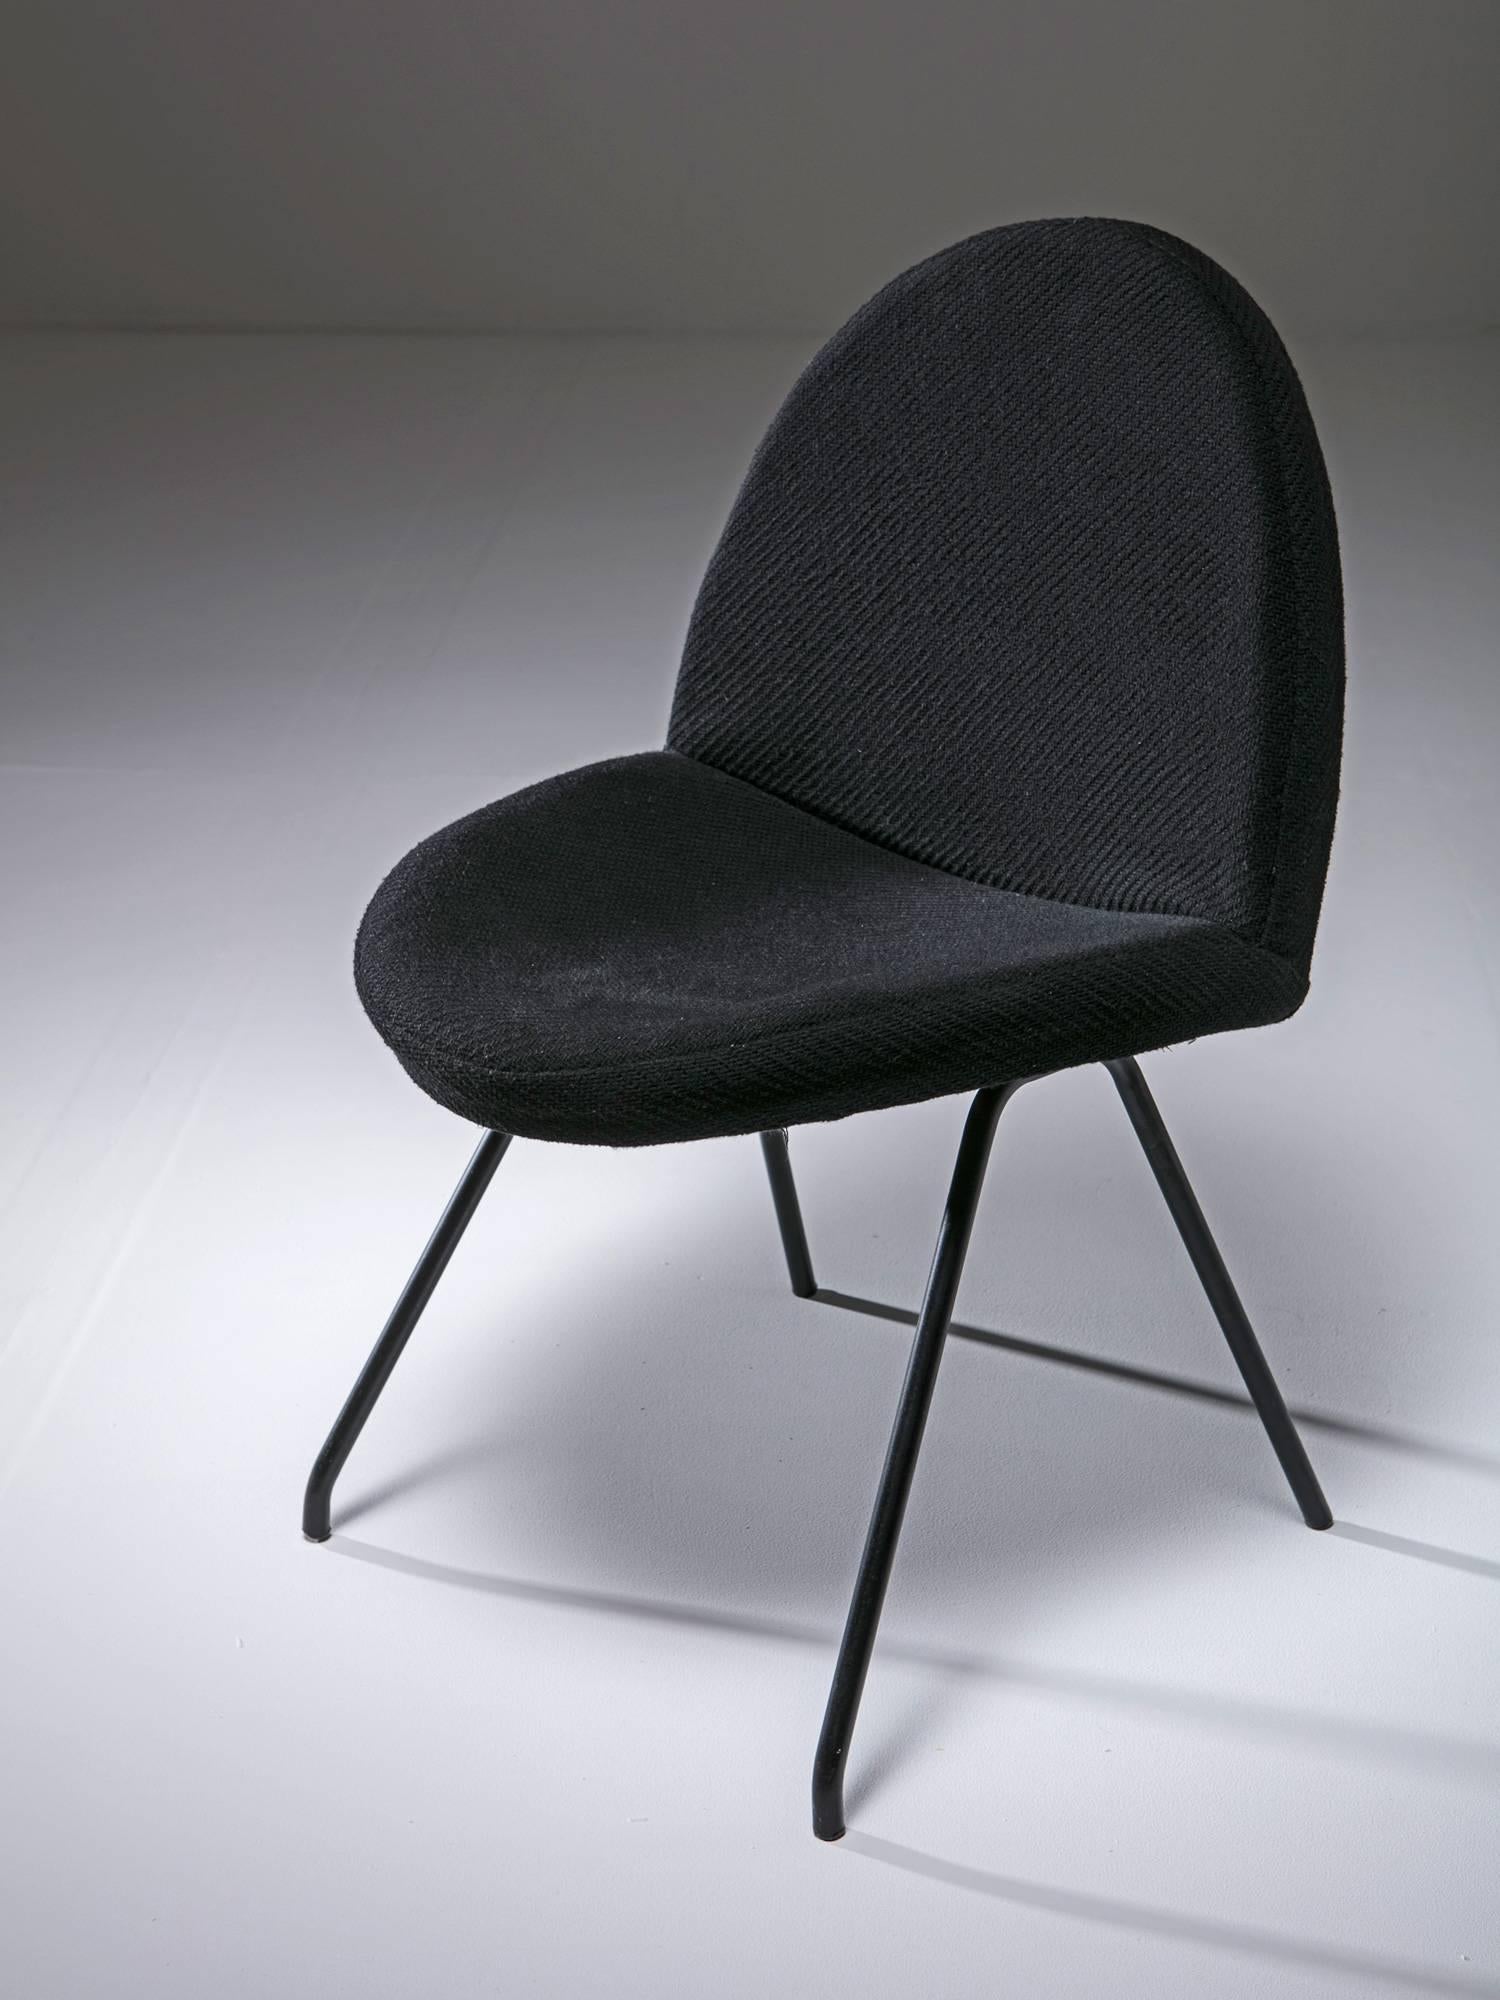 Set of four chairs model 771 by Joseph Andre Motte for Steiner.
Original wool fabric and upholstery in good conditions.